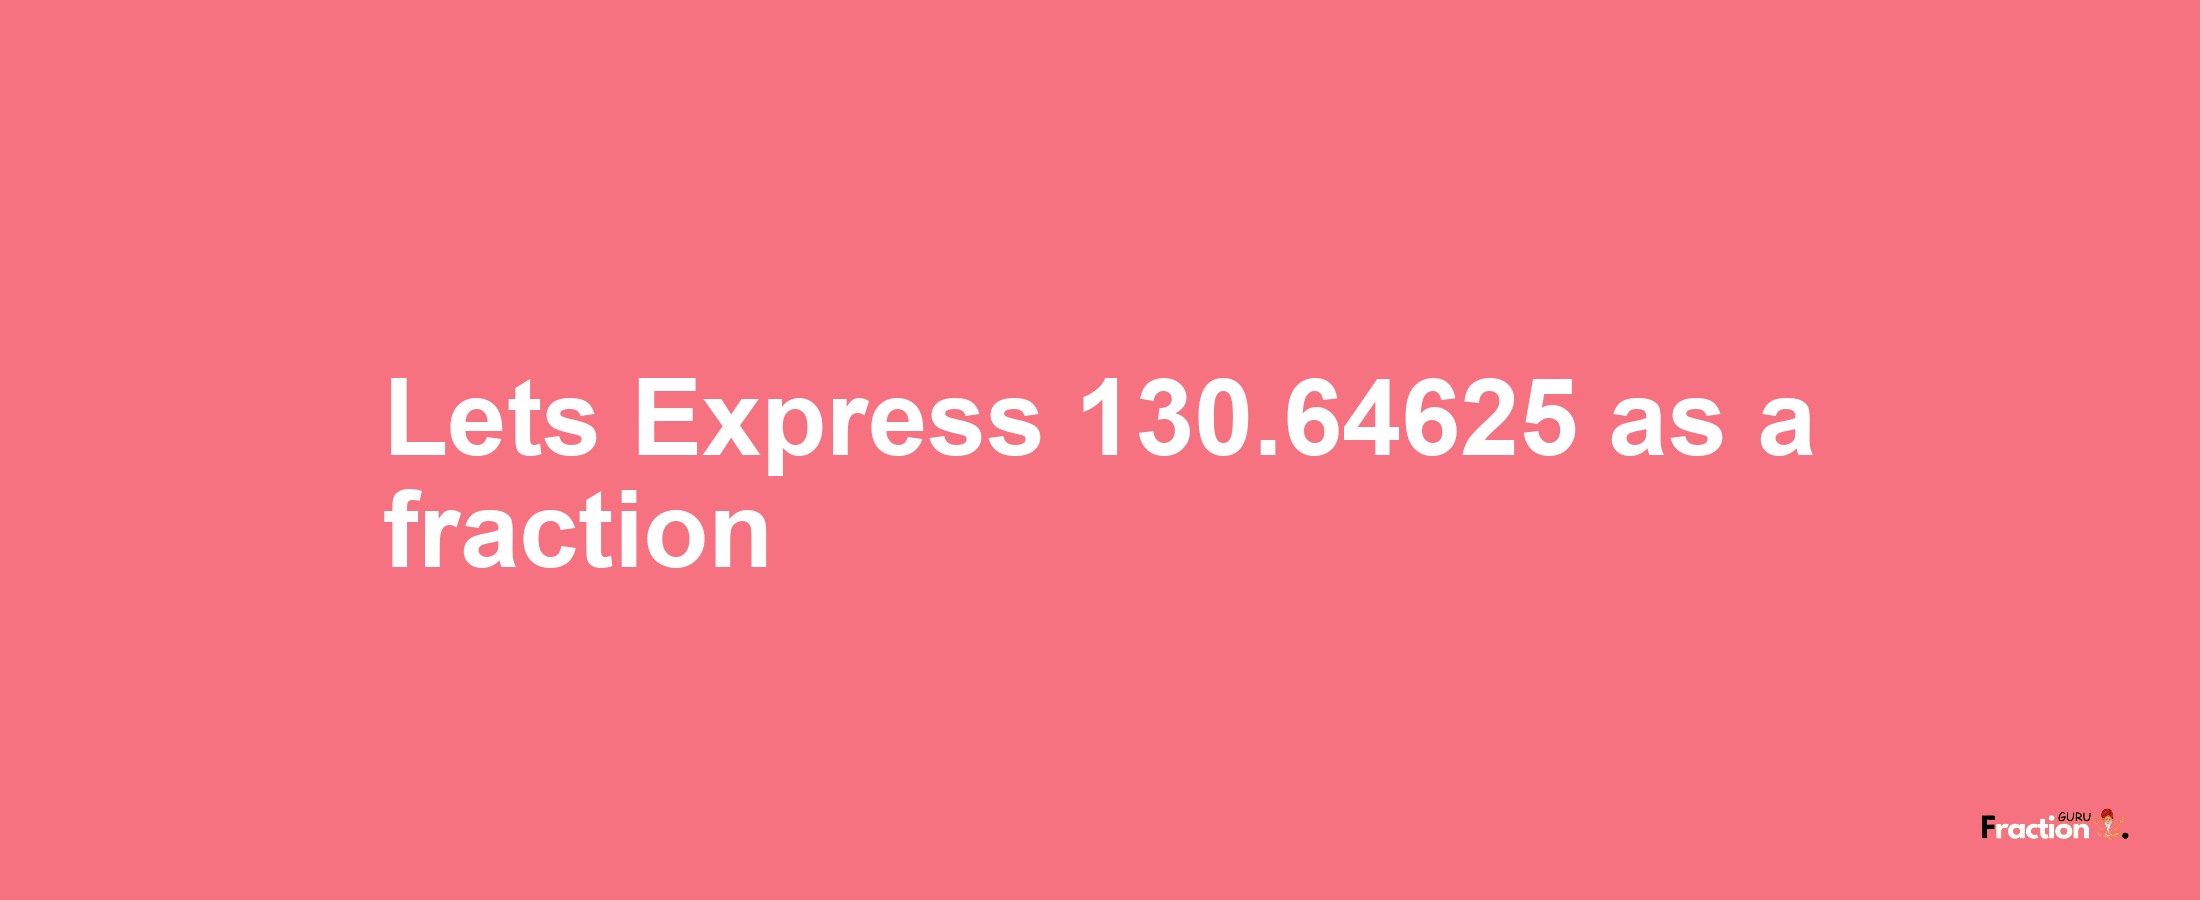 Lets Express 130.64625 as afraction